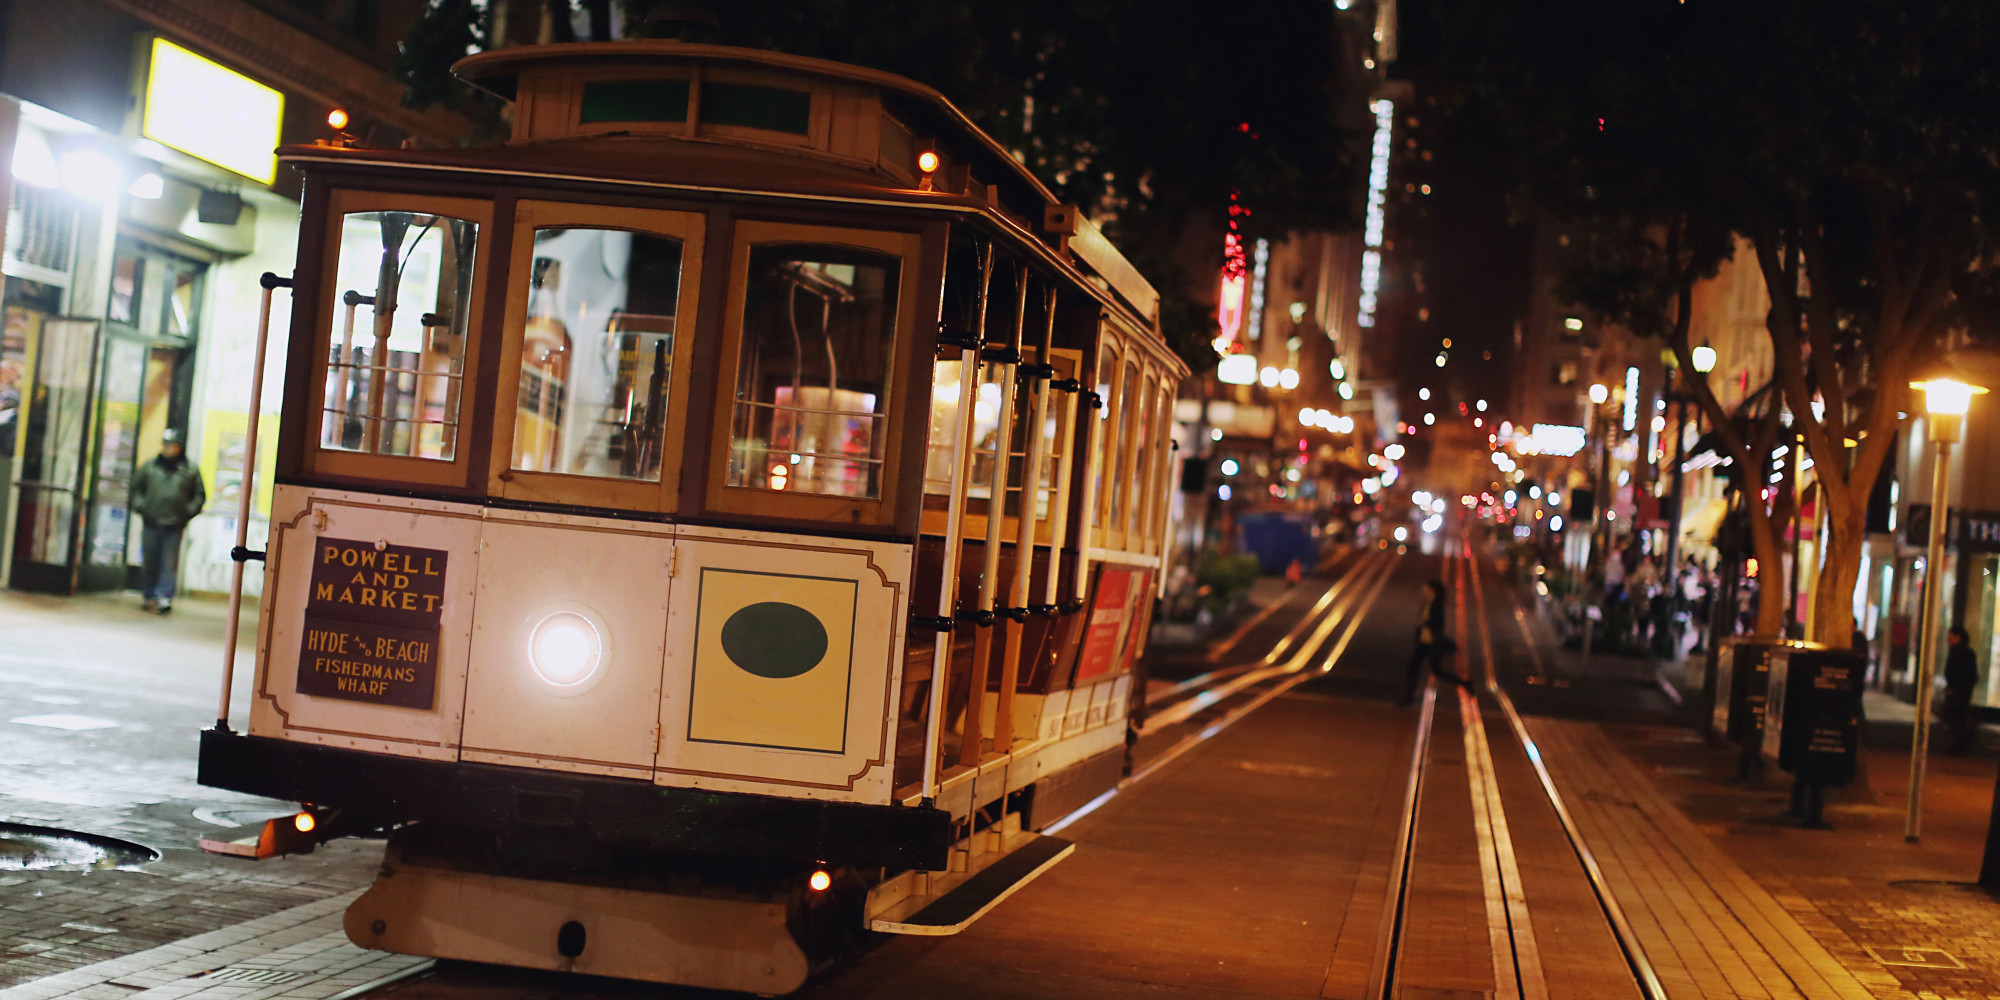 Cable car in San Francisco